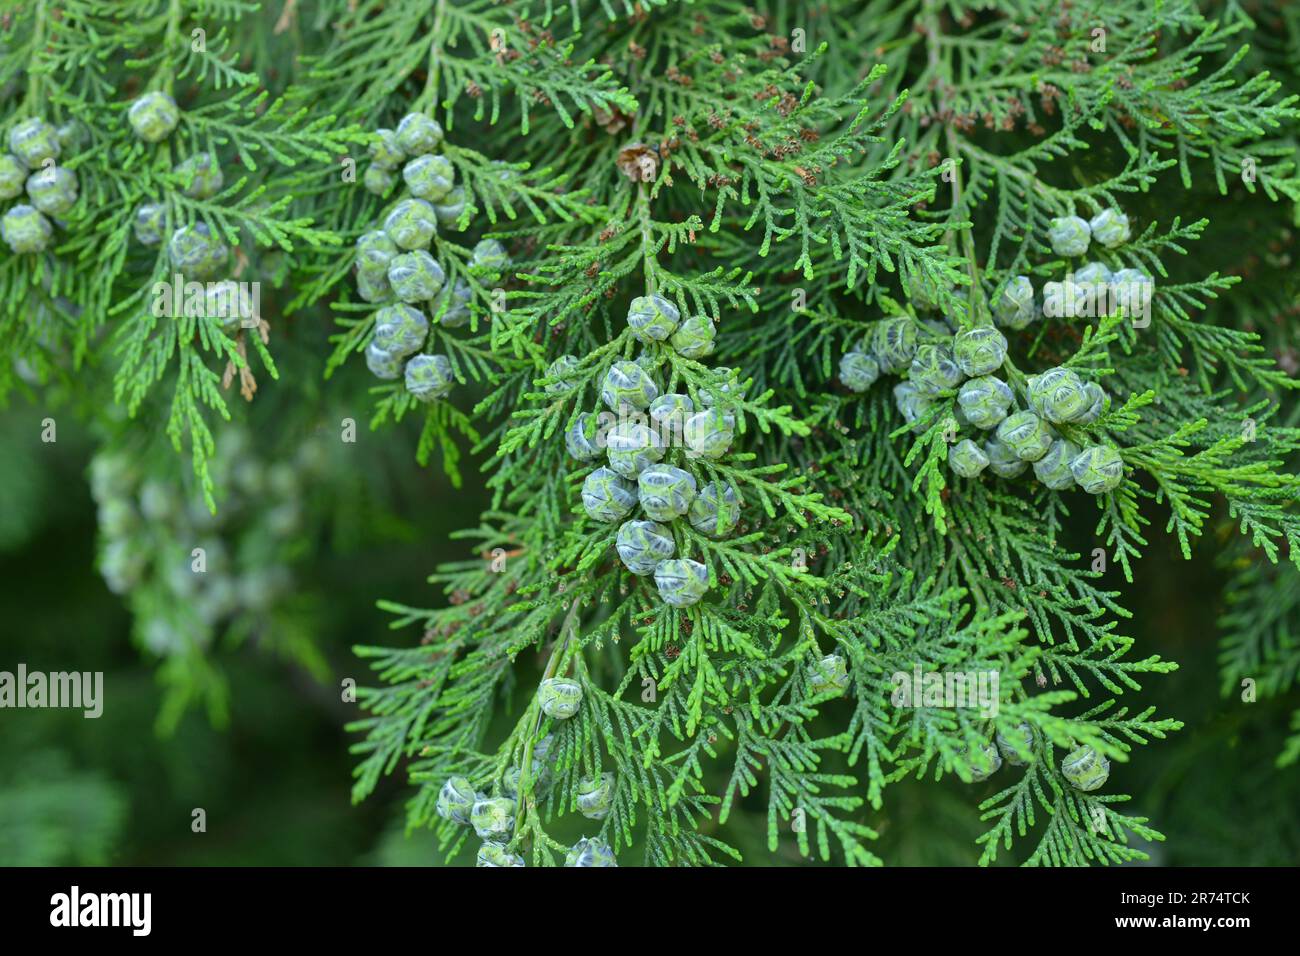 A green branch of Lawson's cypress blooming in the summer garden Stock Photo